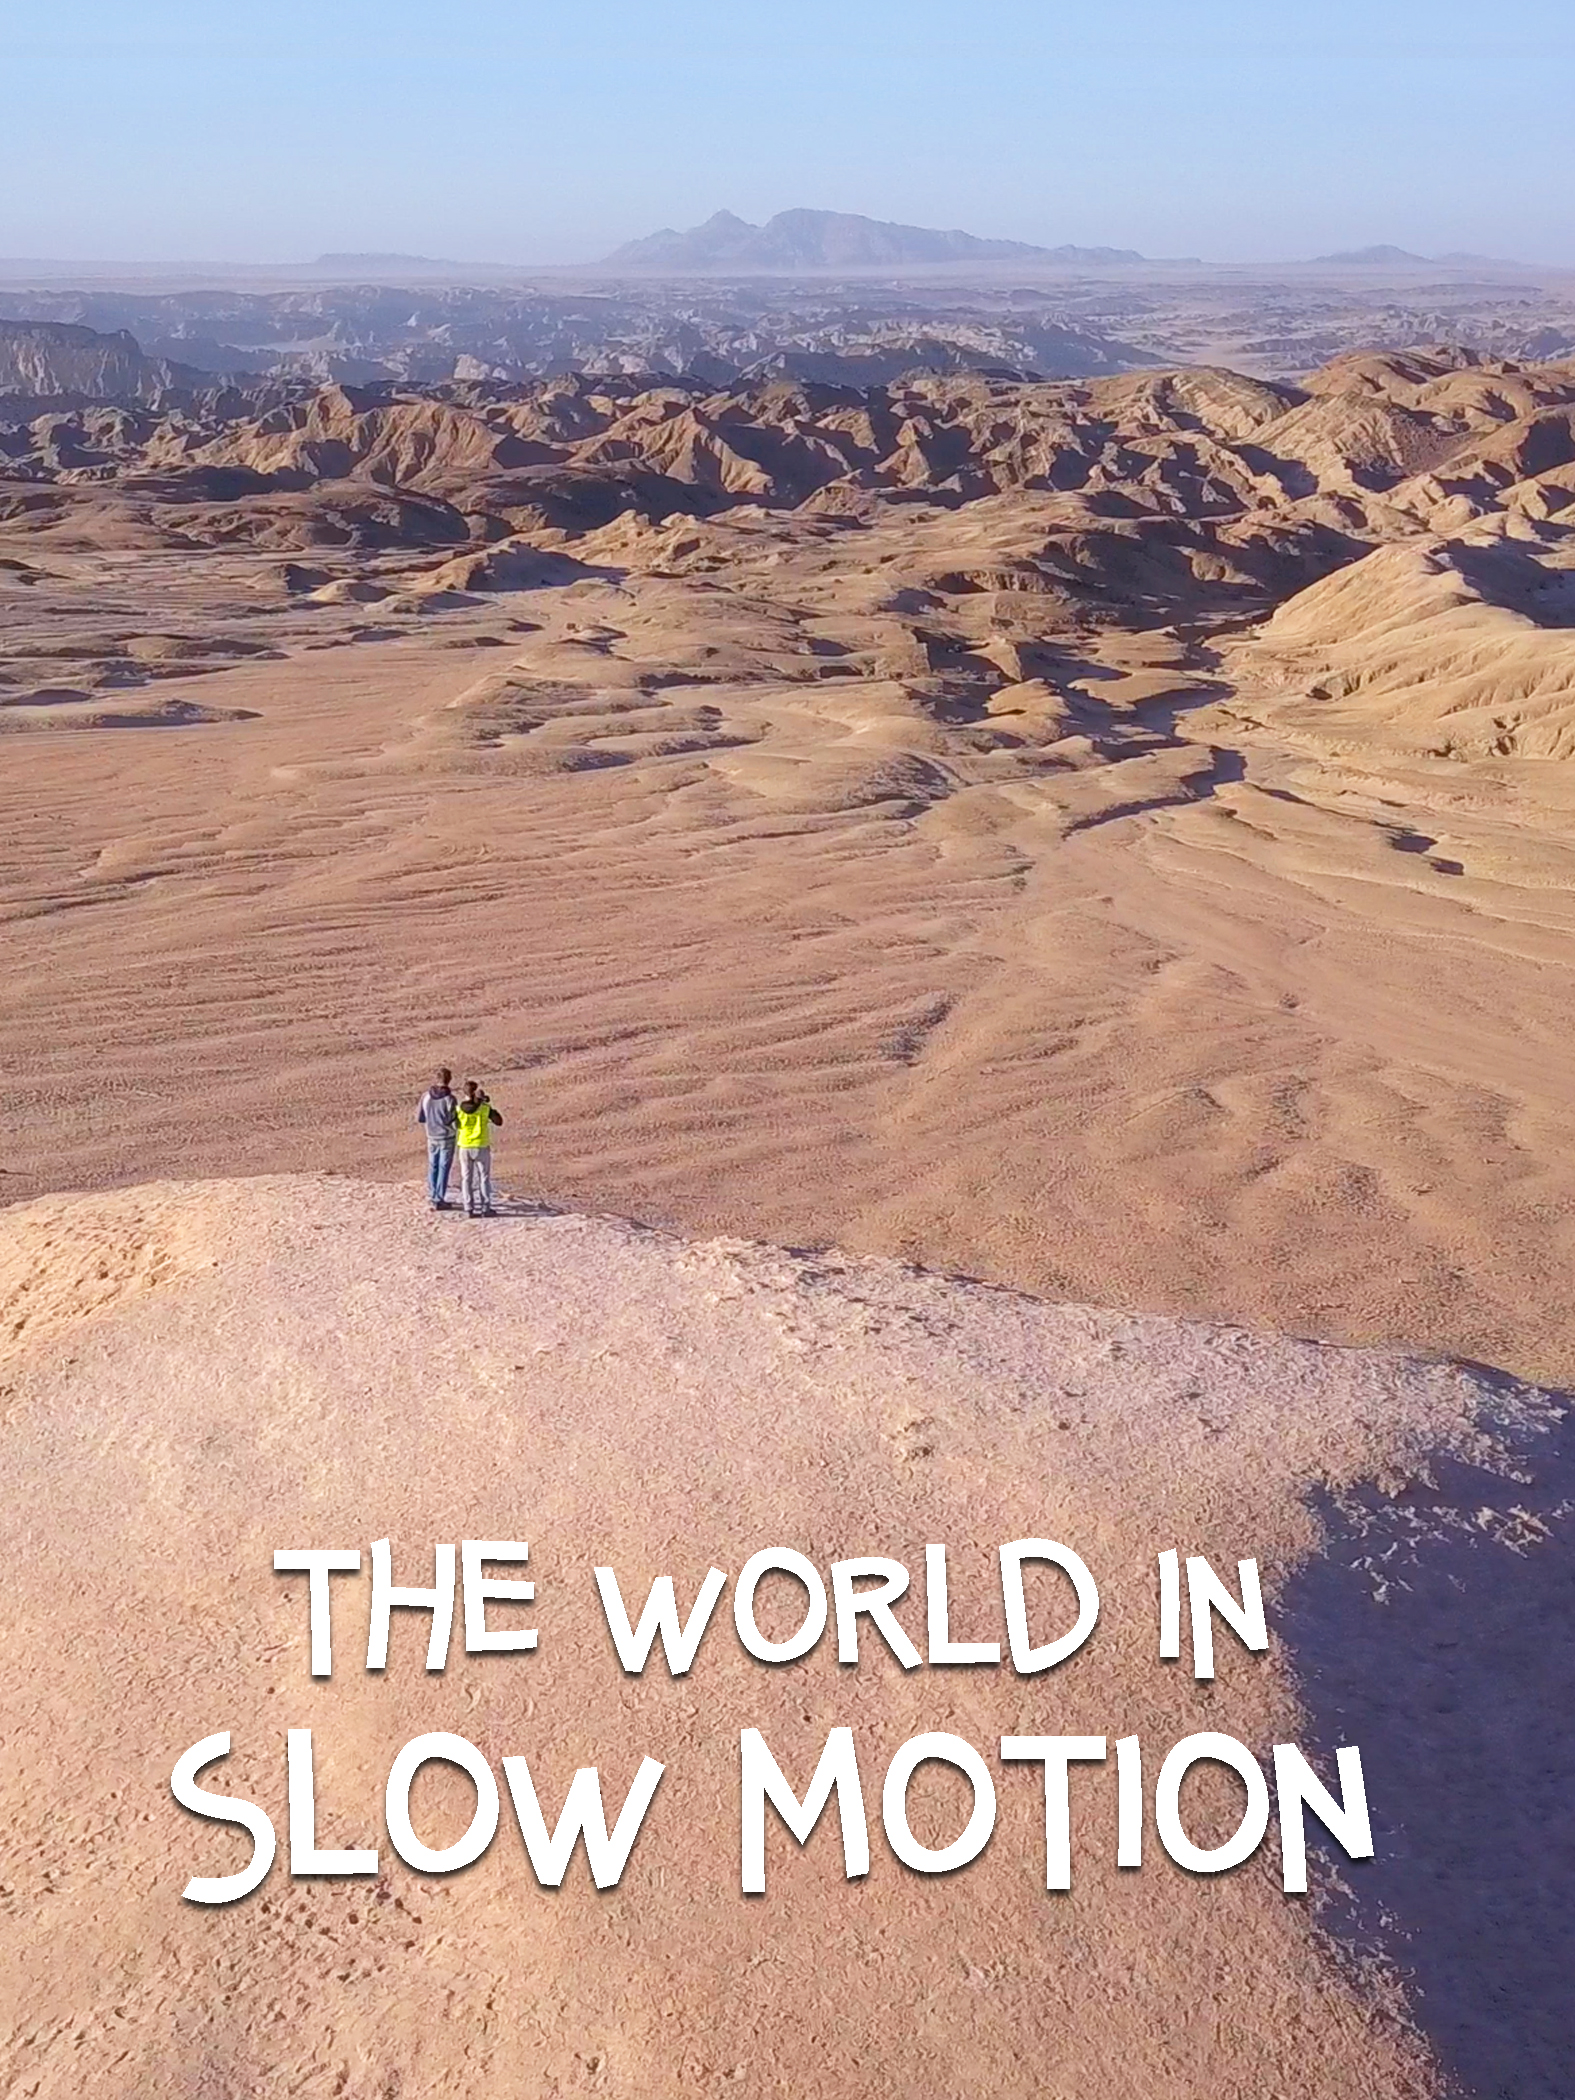 The World in Slow Motion